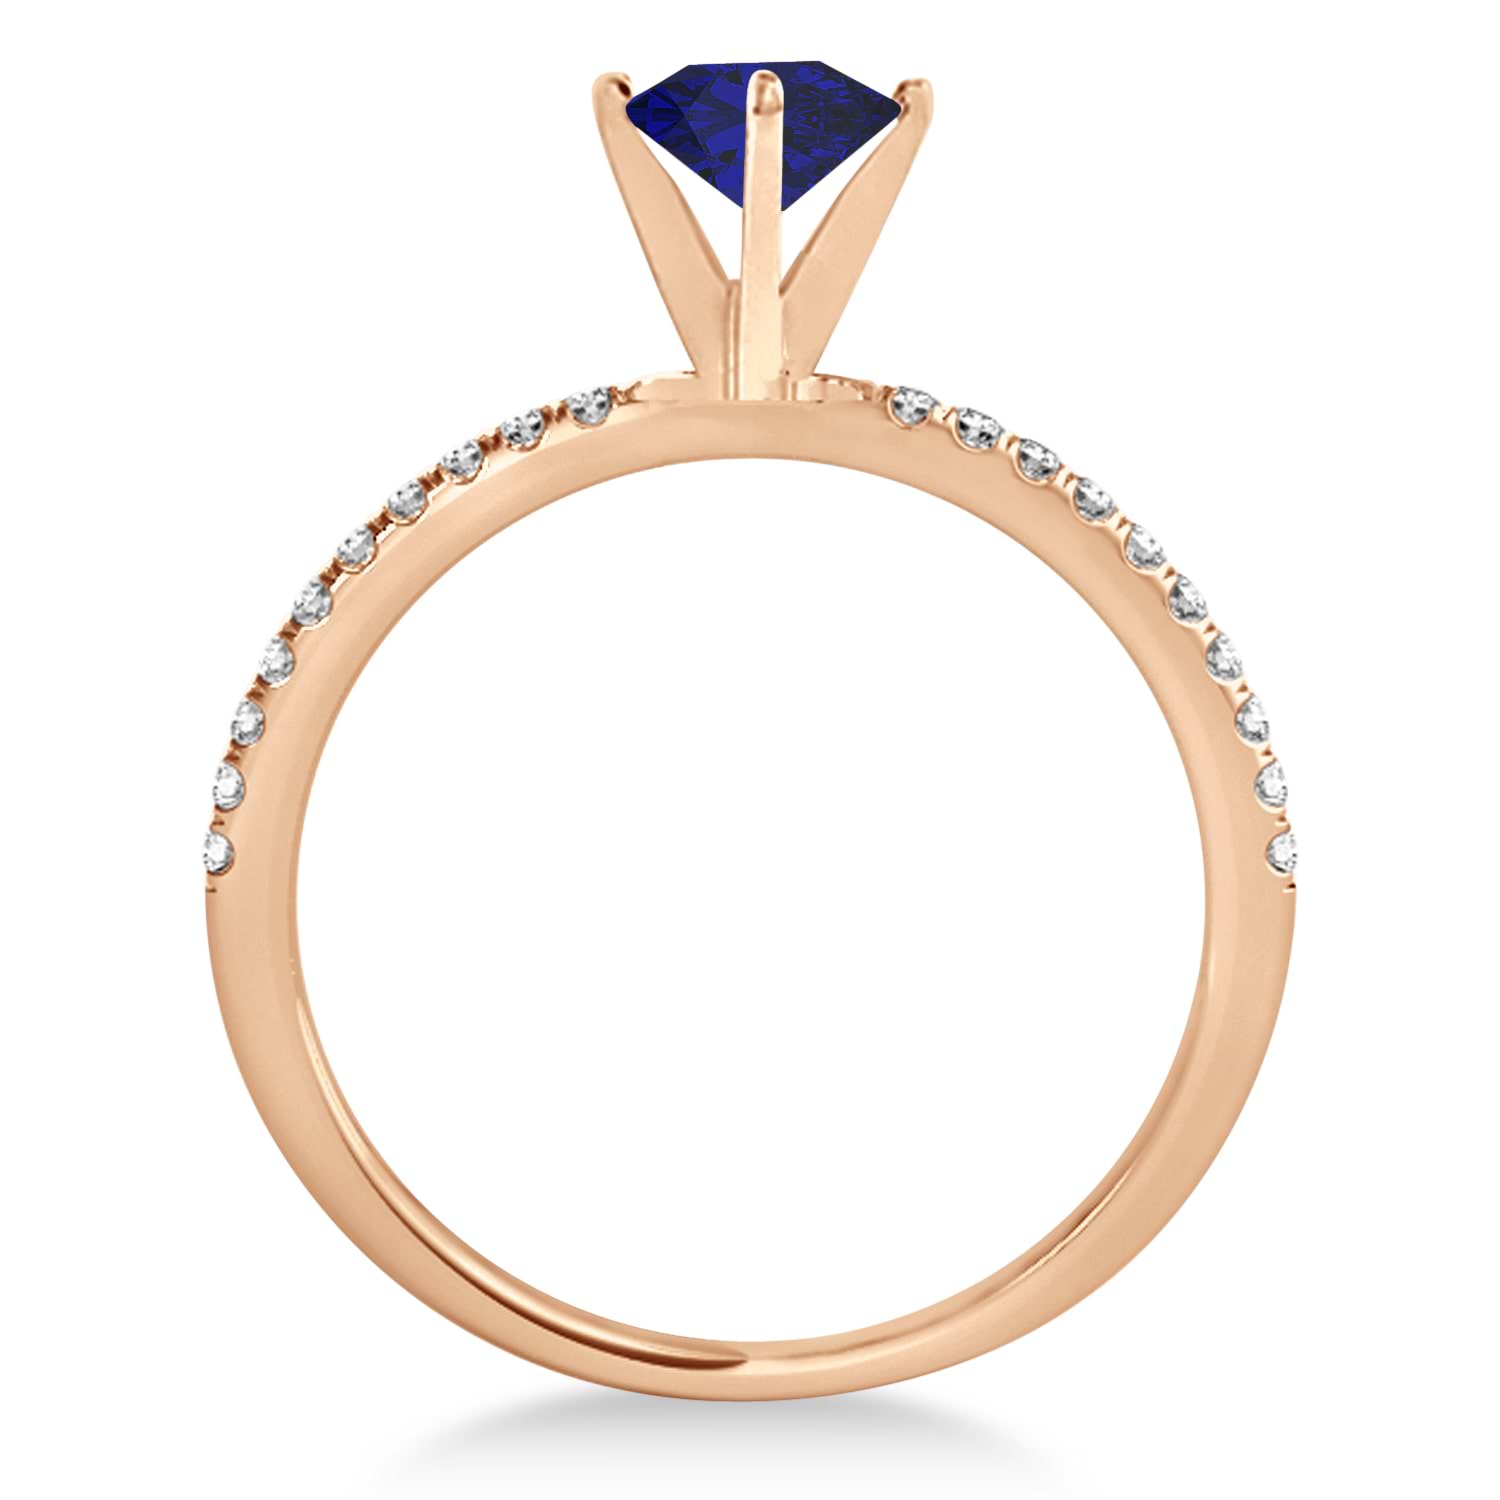 Blue Sapphire & Diamond Accented Oval Shape Engagement Ring 14k Rose Gold (3.00ct)